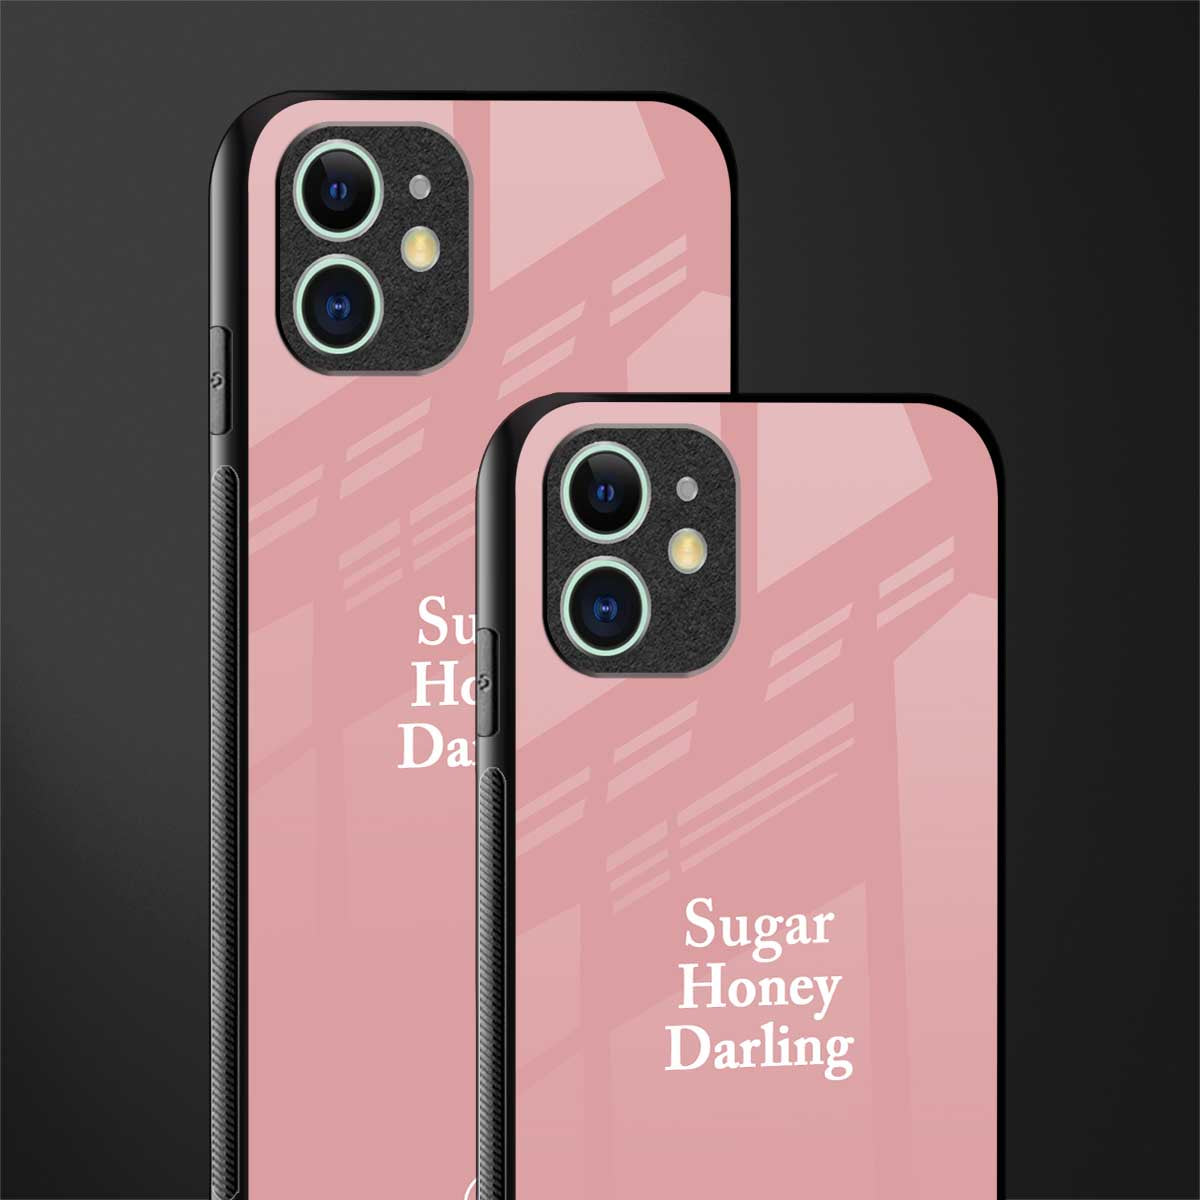 suger honey darling glass case for iphone 12 mini image-2